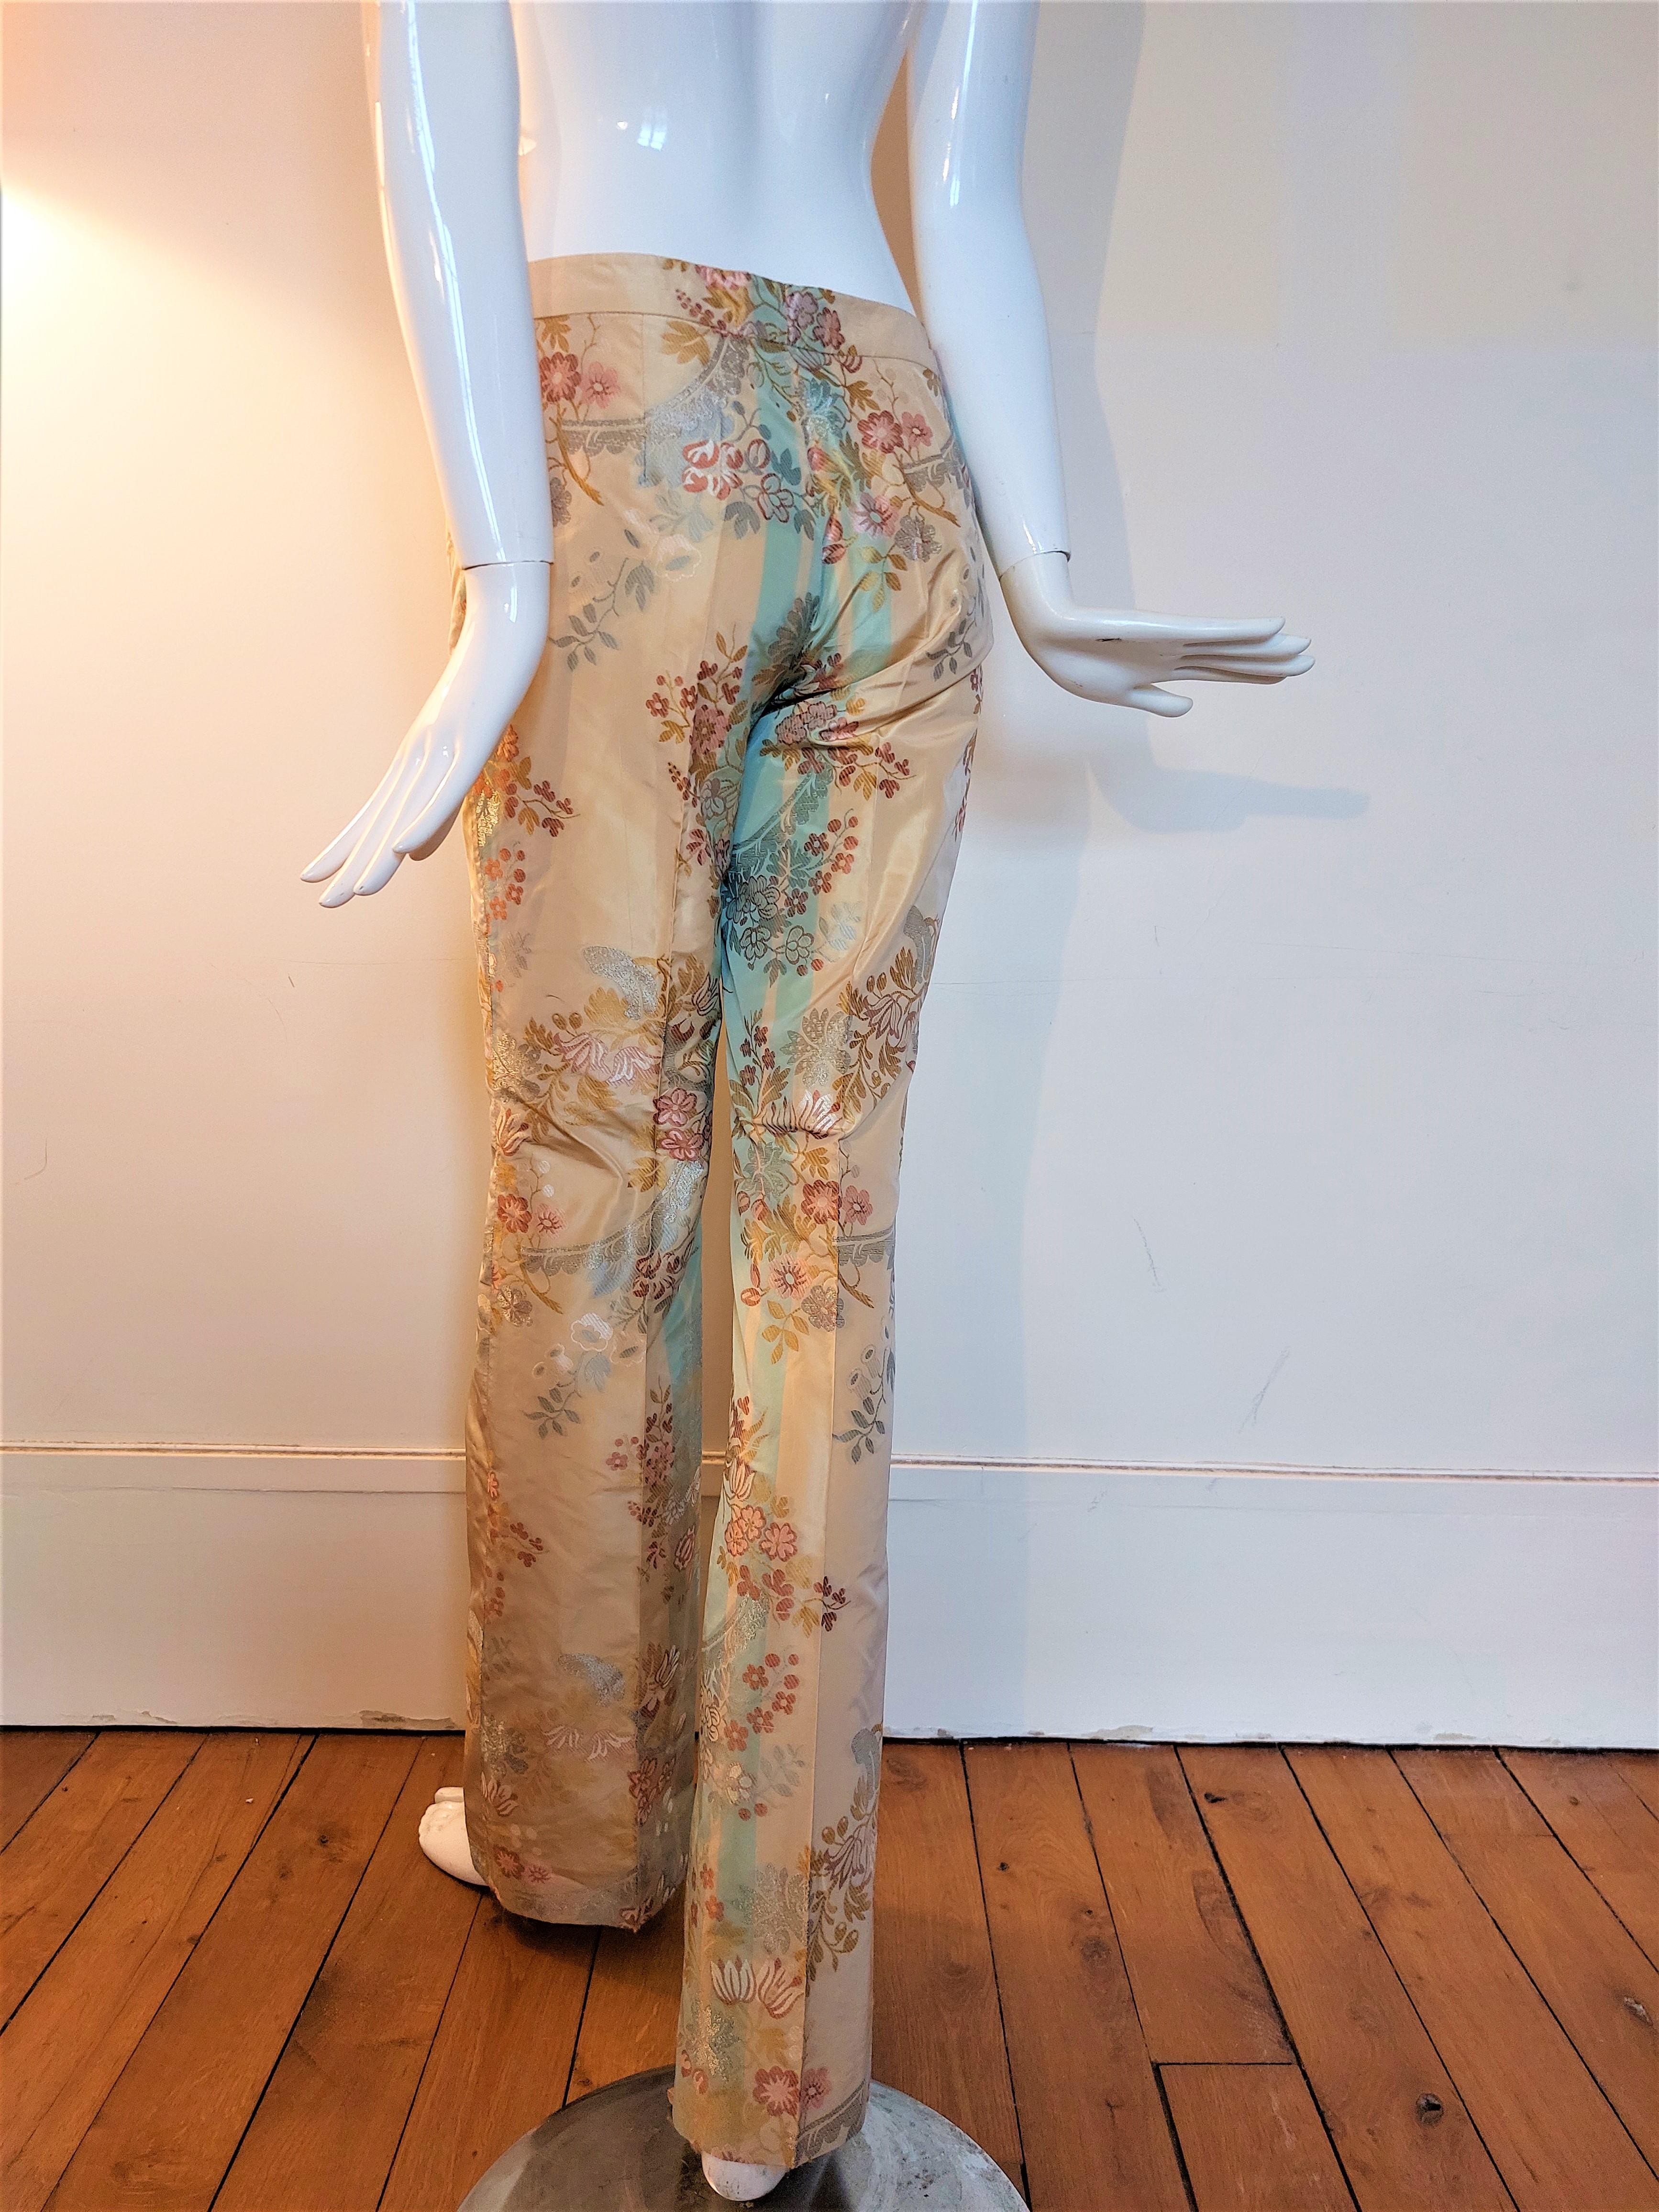 Alexander Mcqueen Shipwreck 2000S Silk Brocade Frock Pirate Trousers Jacket Suit For Sale 14